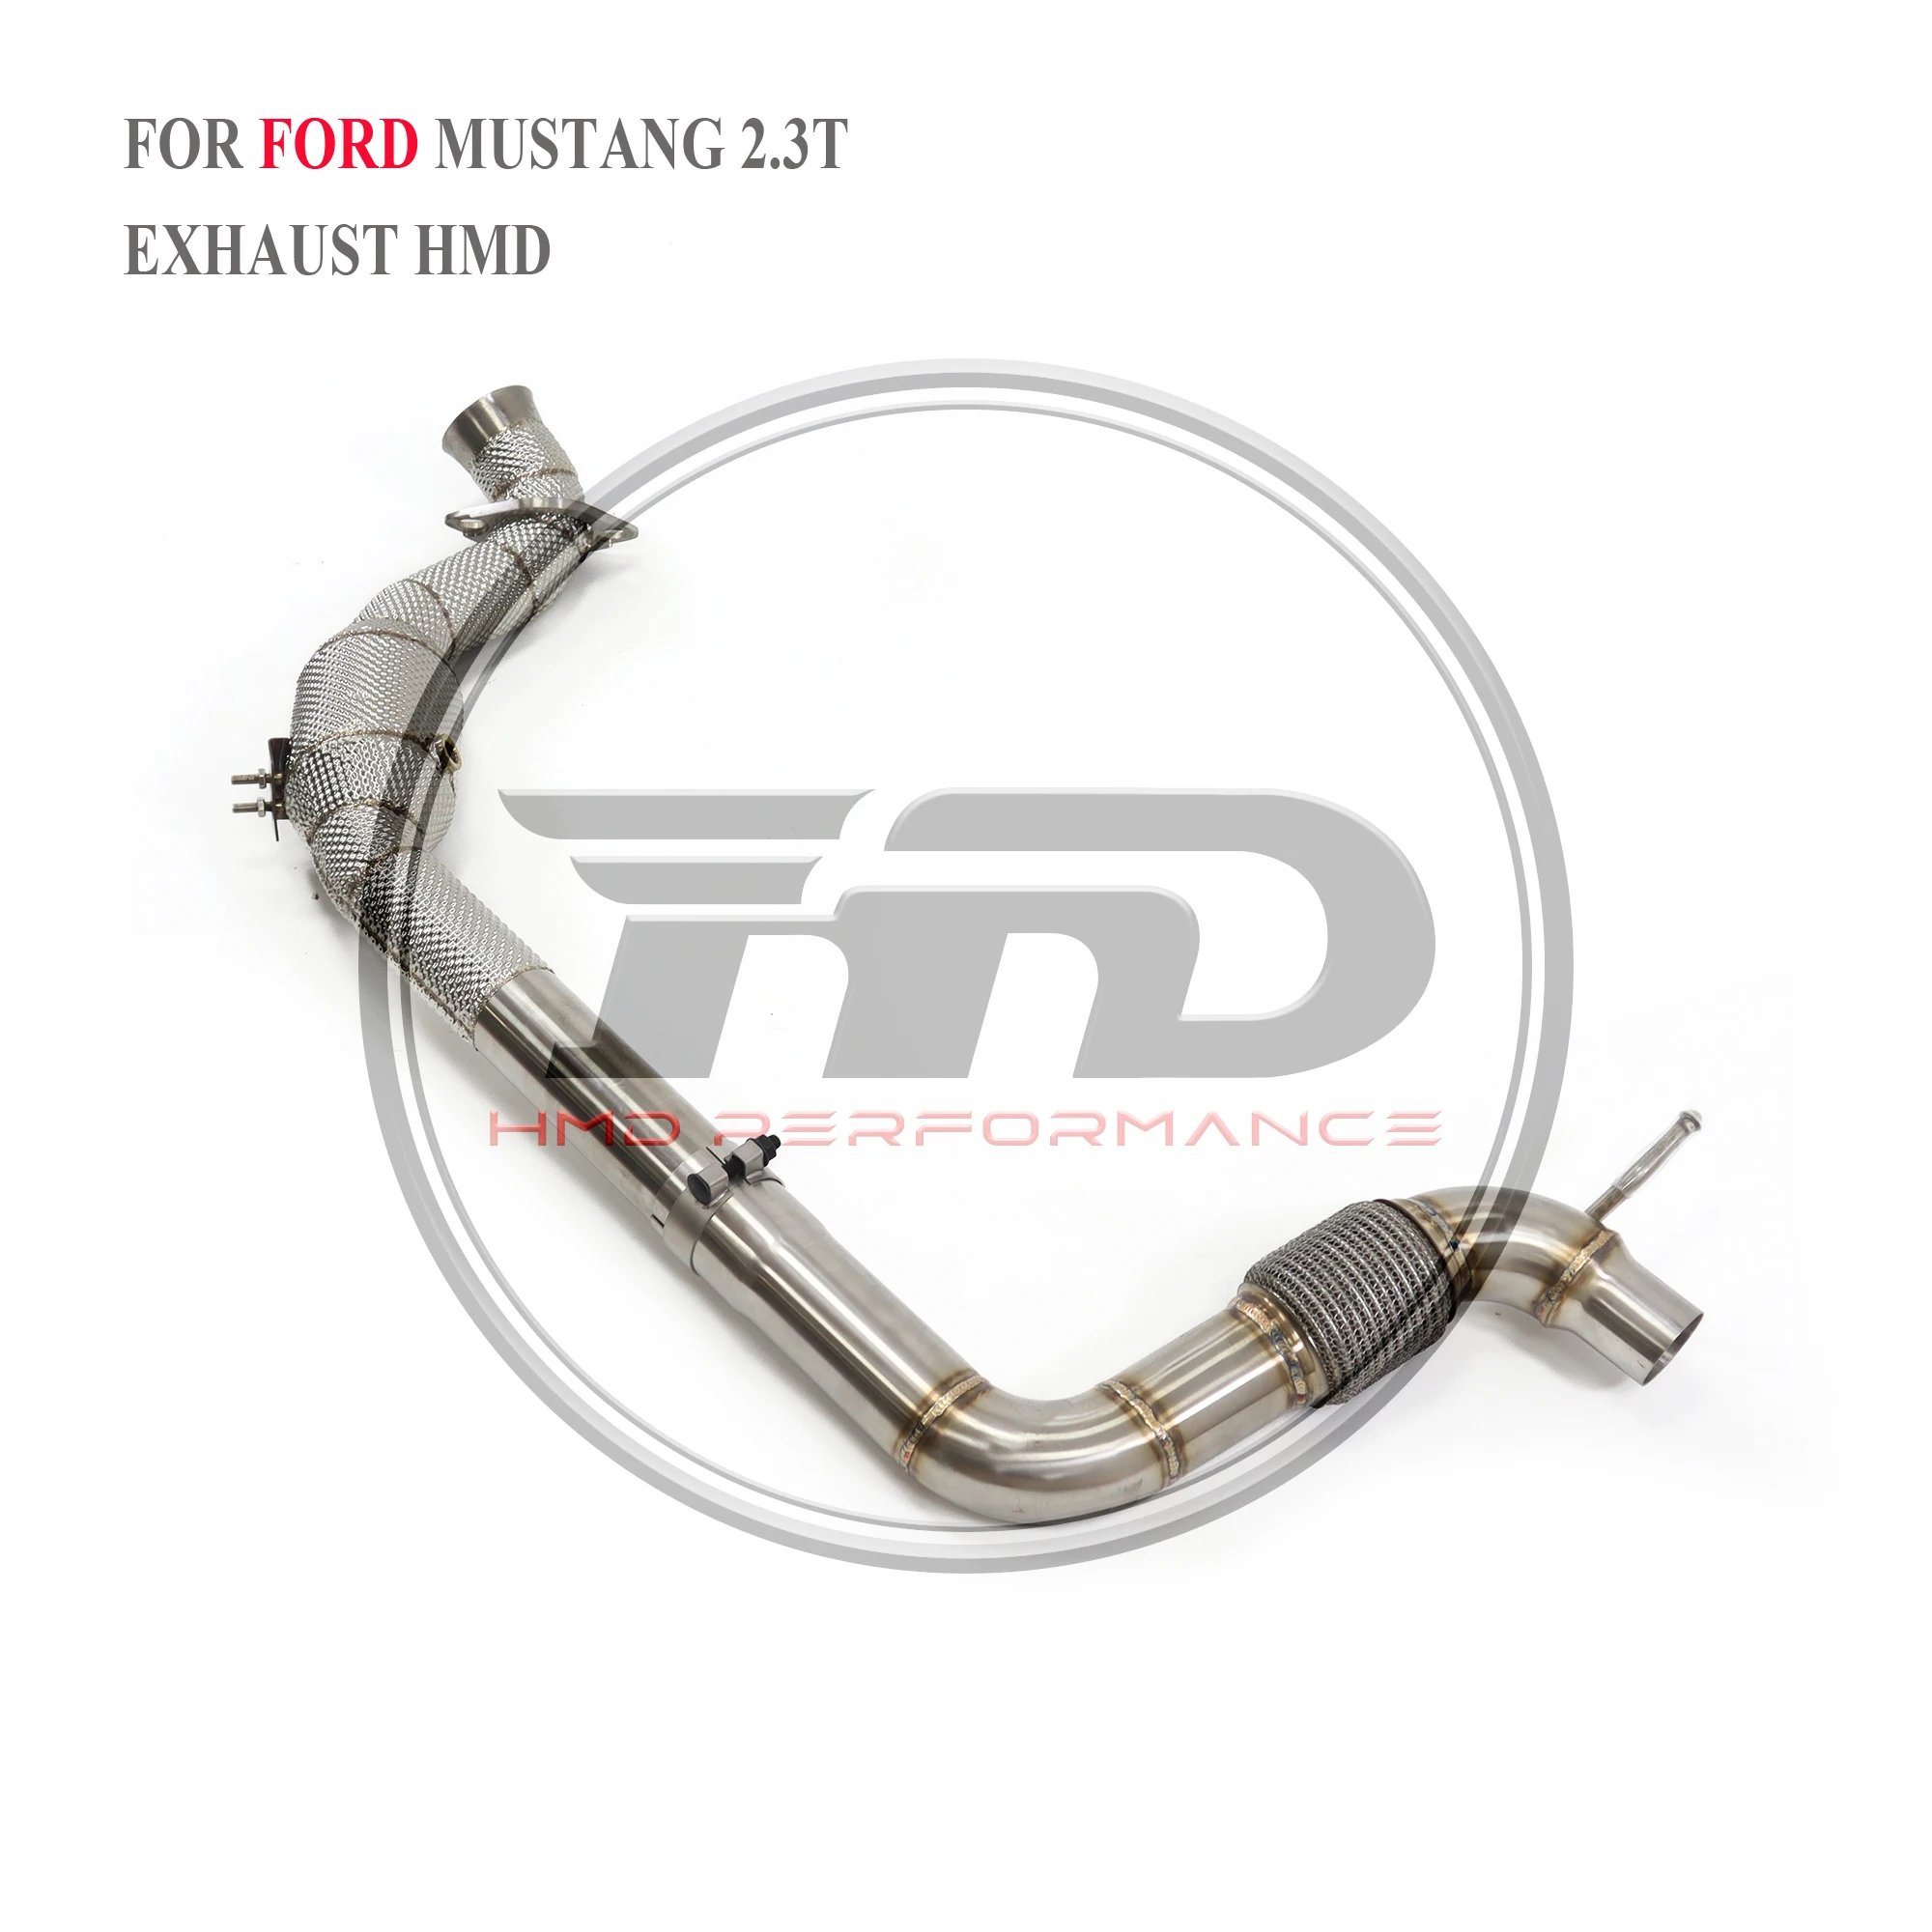 

HMD Exhaust Manifold Downpipe for Ford Mustang 2.3T Car Accessories With Catalytic Converter Header Without Cat Pipe